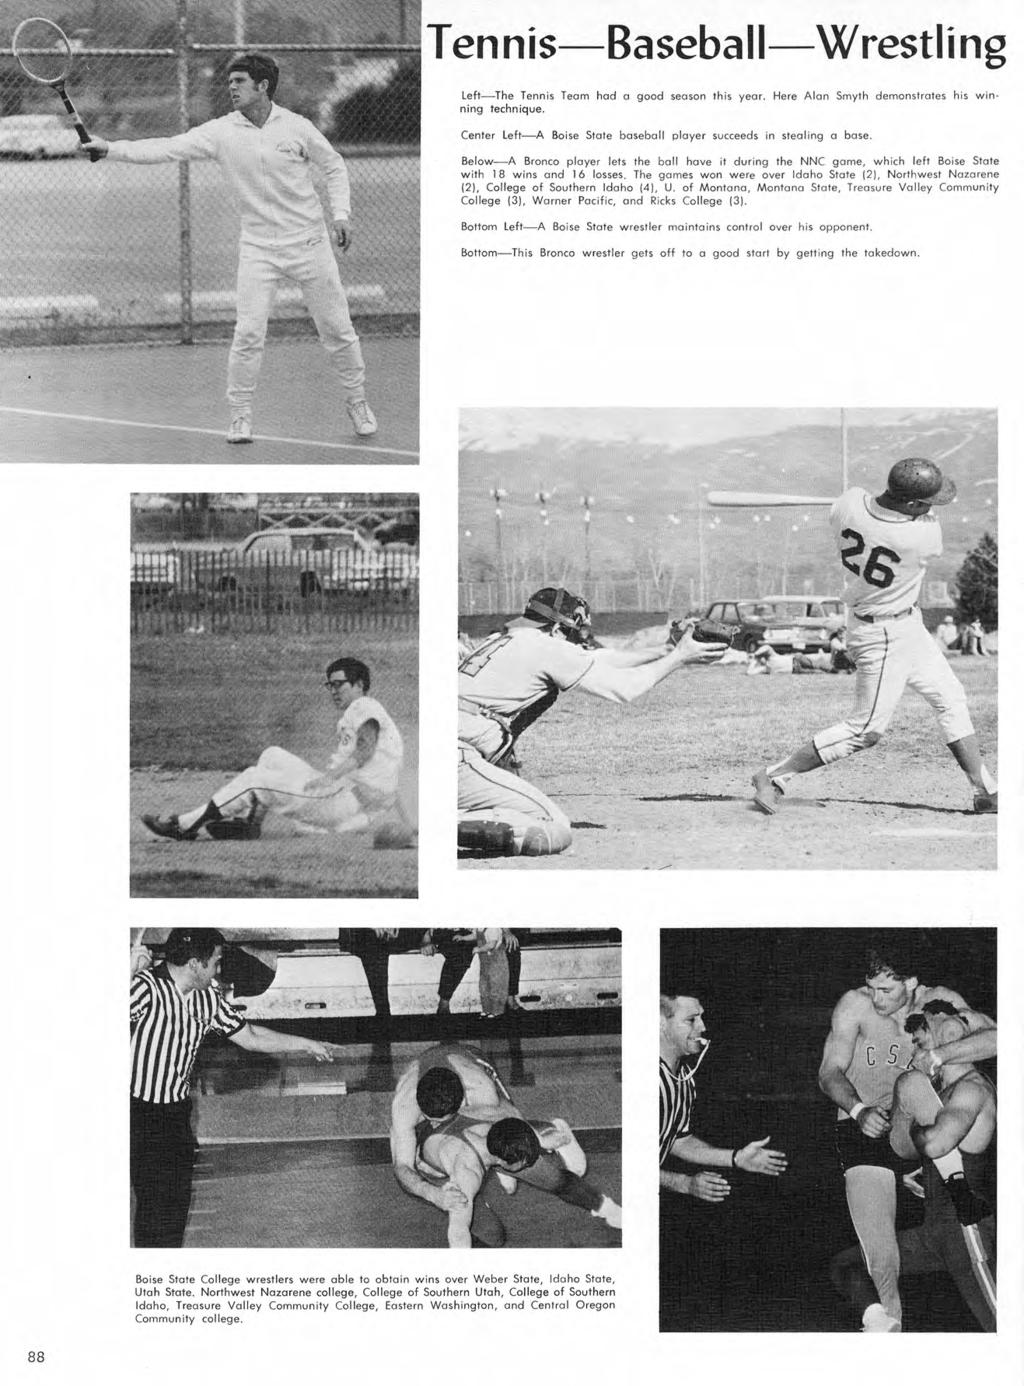 Tennis Baseball Wrestling Left The Tennis Team had a good season this year. Here Alan Smyth demonstrates his winning technique. Center Left A Boise State baseball player succeeds in stealing a base.